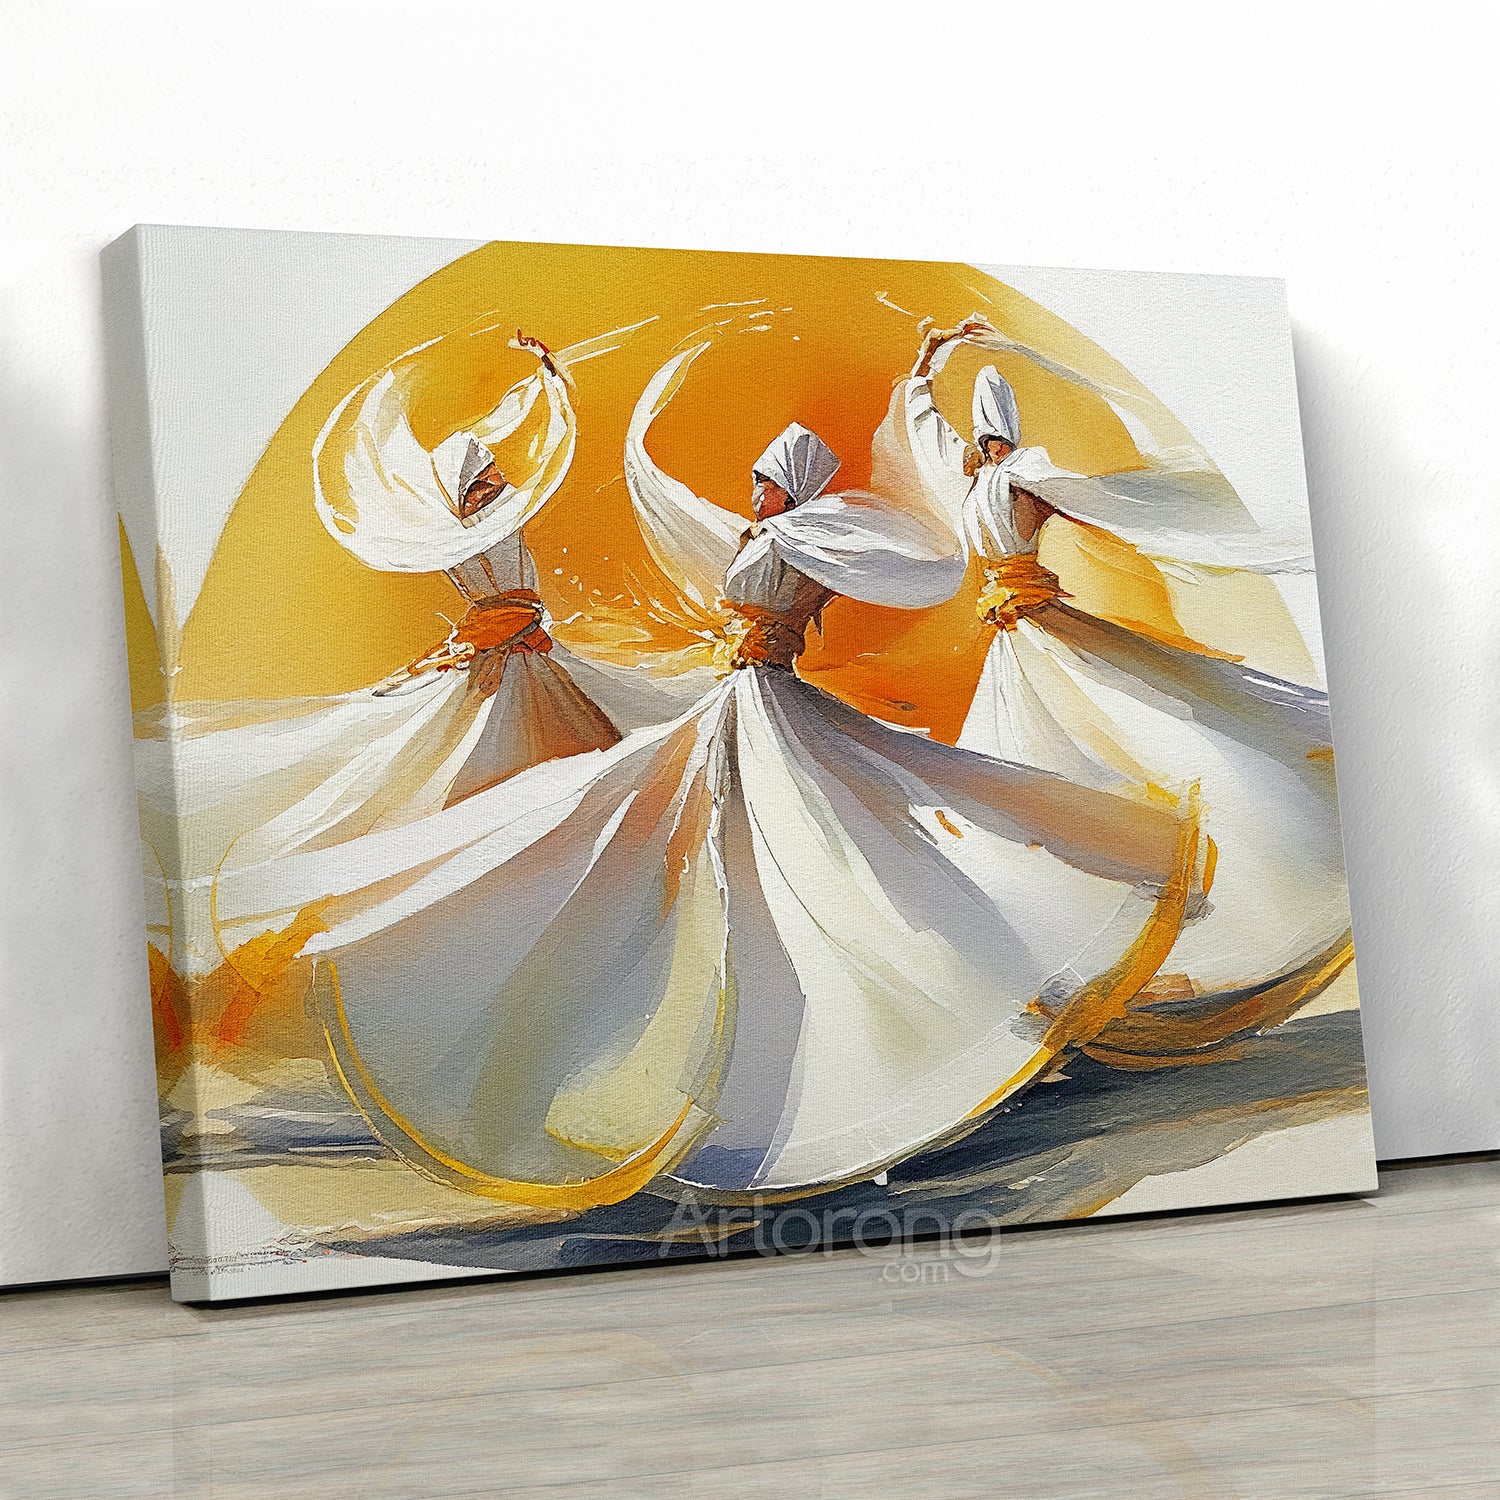 Abstract painting of whirling Dervish, Ancient Sufi dance canvas print wall art, Iranian gift